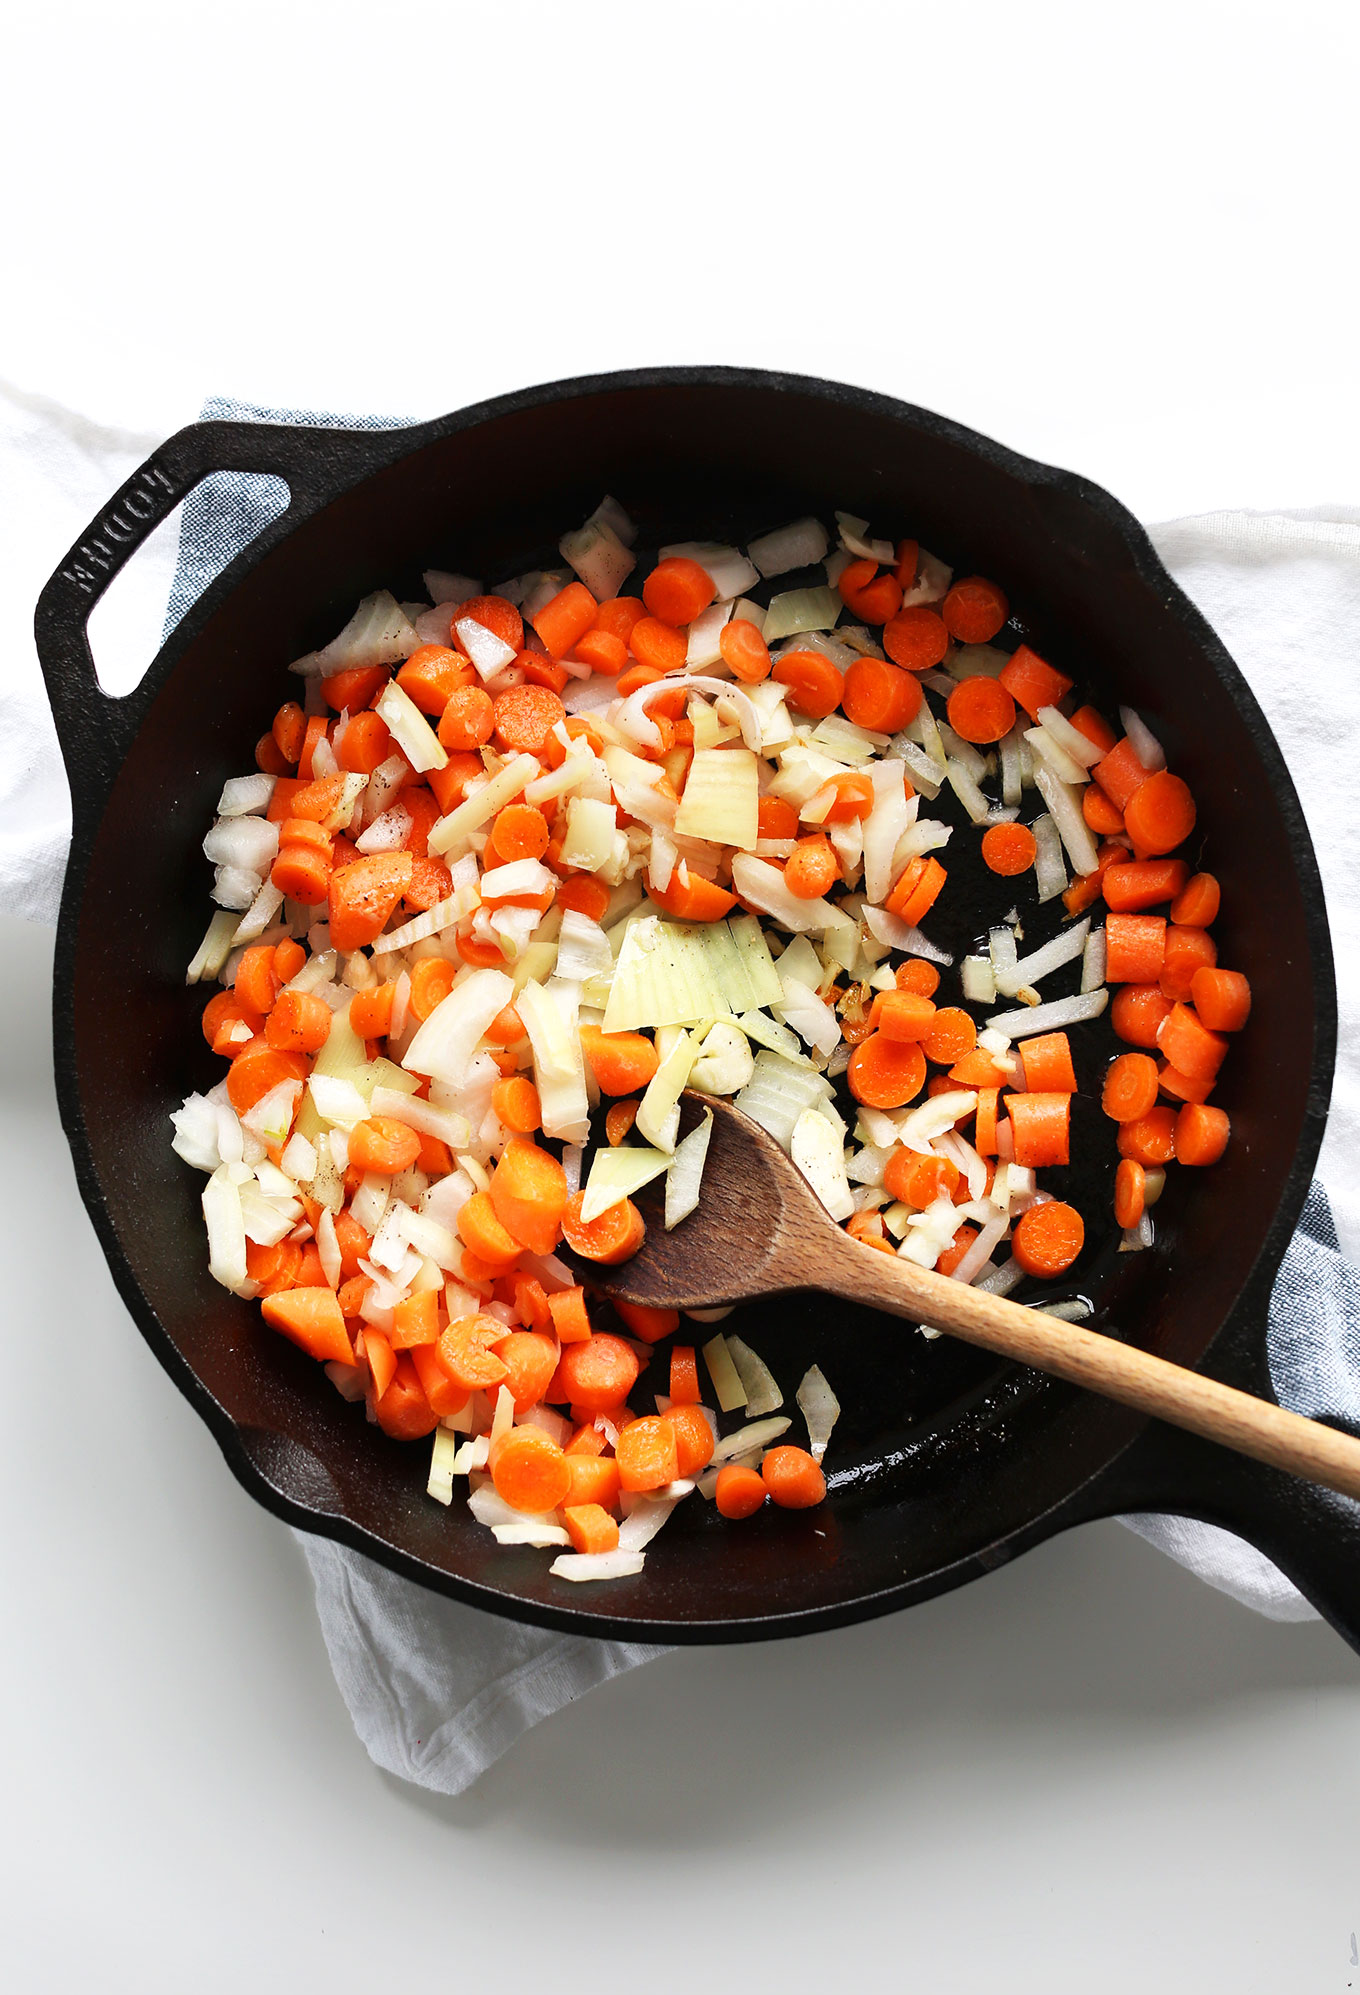 Sautéing onions and carrots for our Spicy Chipotle Red Salsa recipe